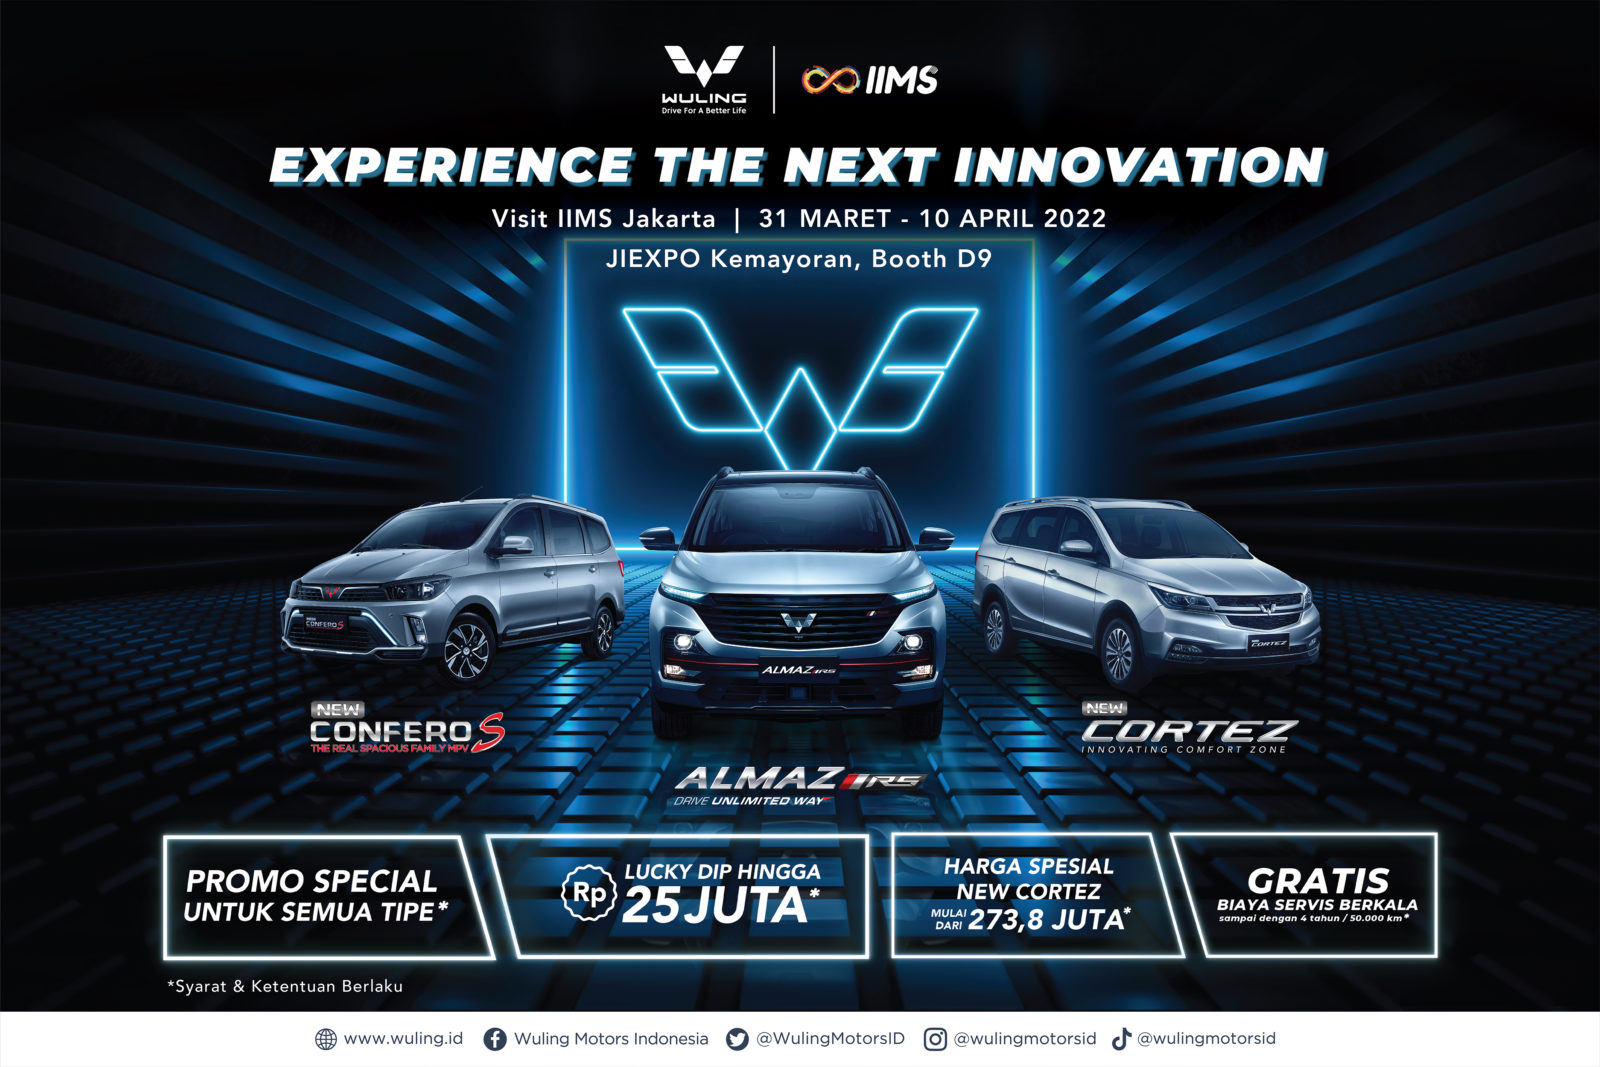 Image Wuling Enlivens IIMS 2022 With Various Special Offers and Promos